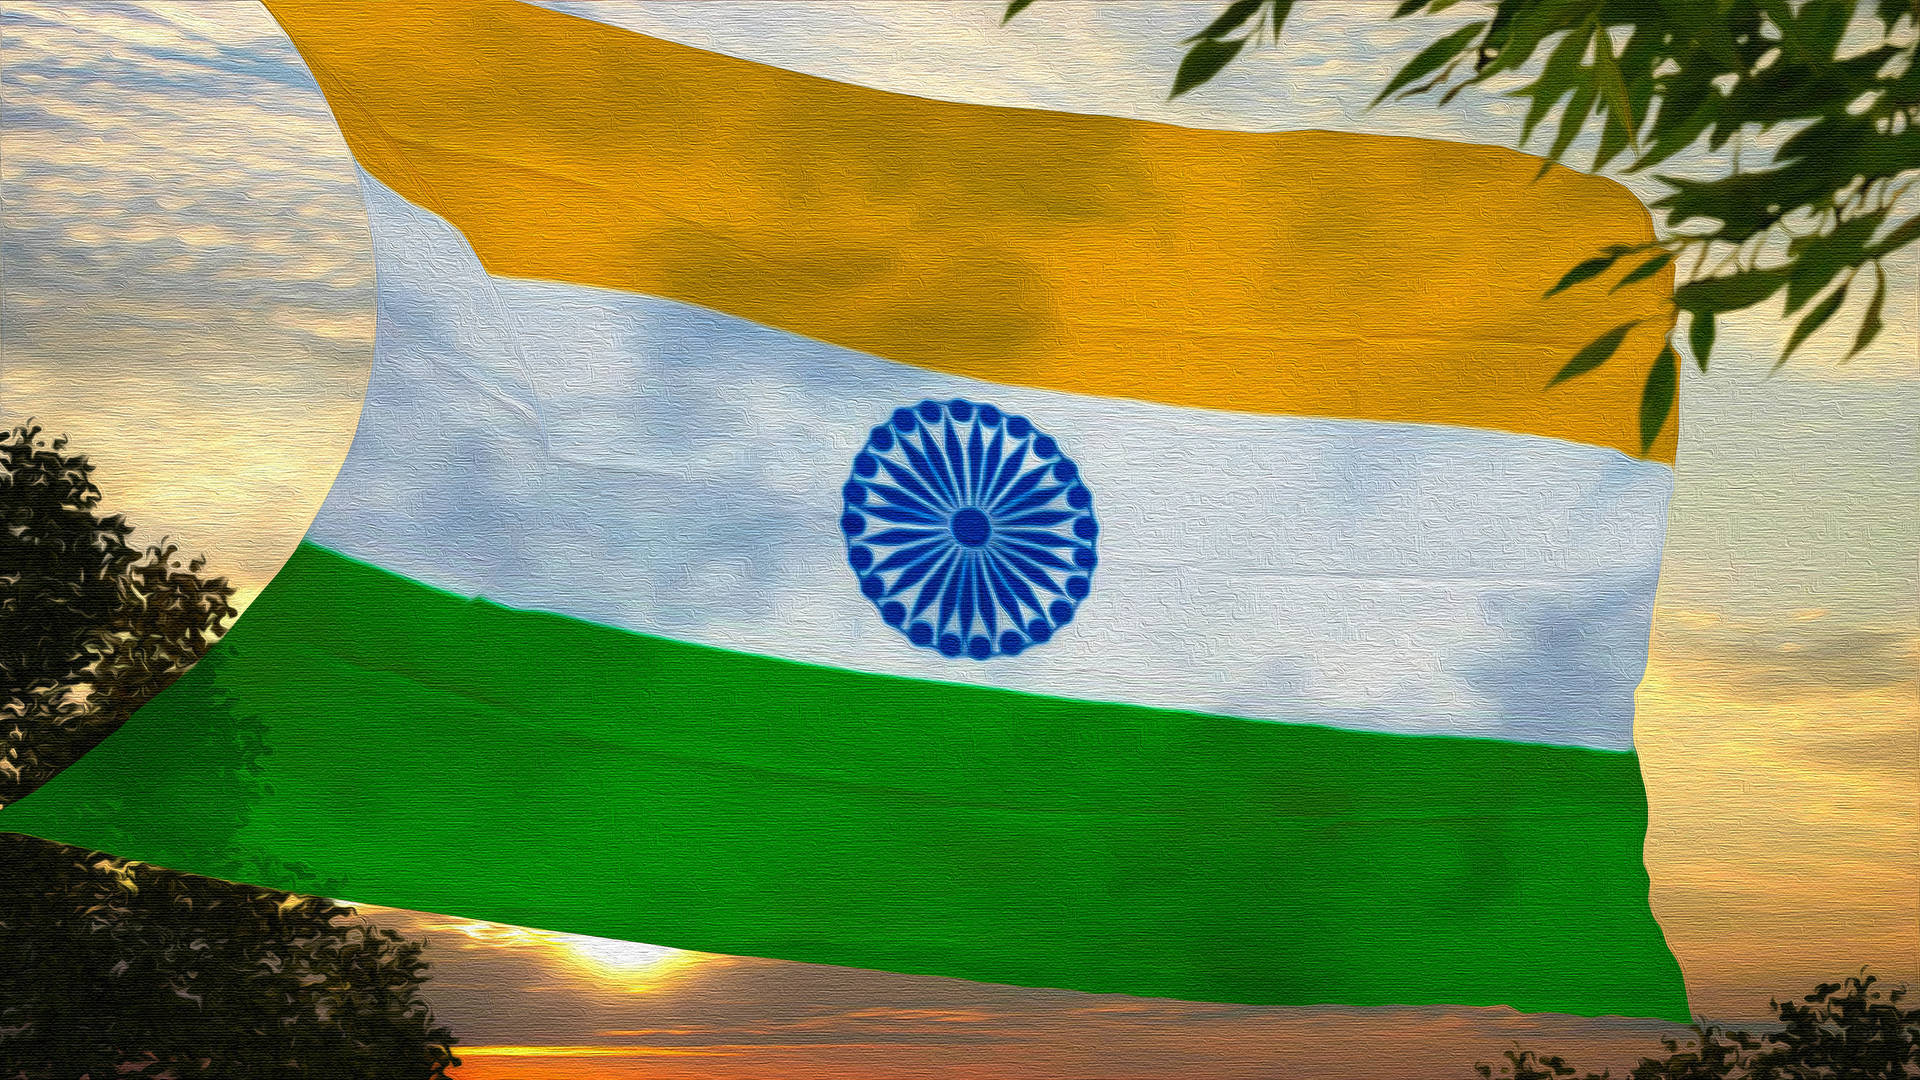 A Salute To The Vibrant Tricolor - Indian Flag Hd